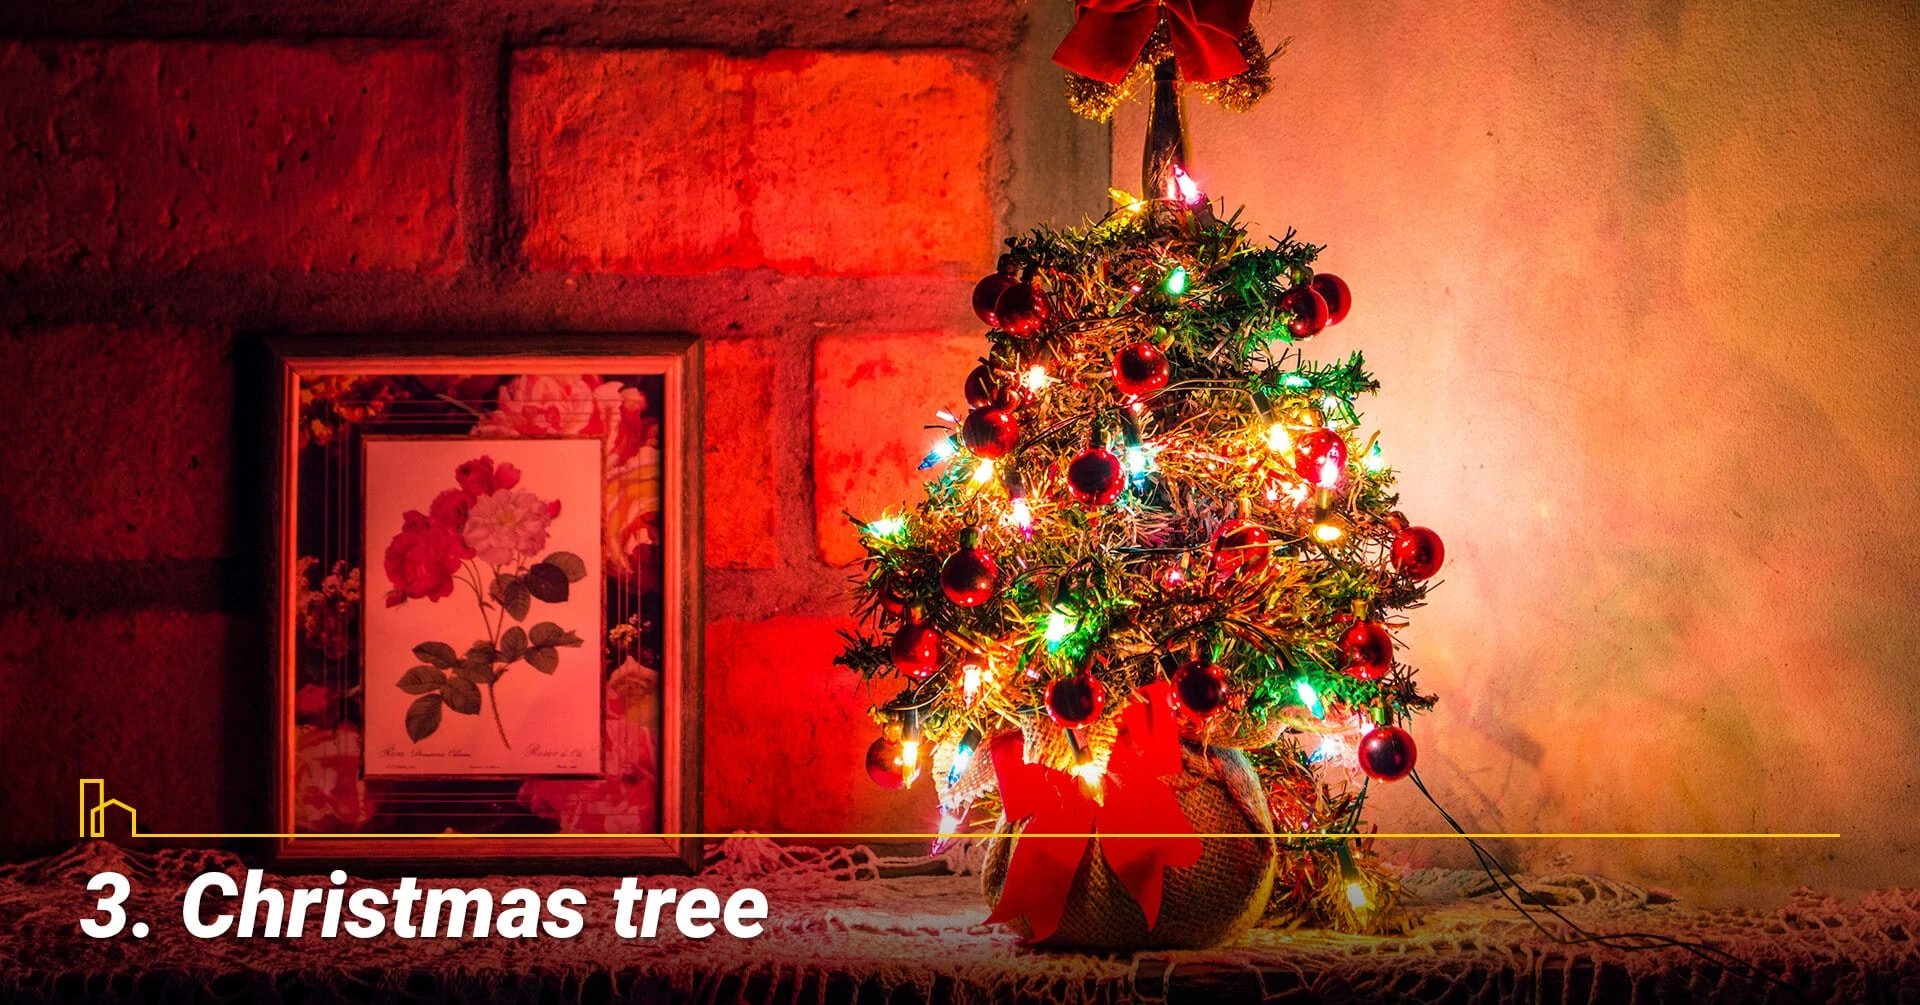 Christmas tree, decorate your home with Christmas tree